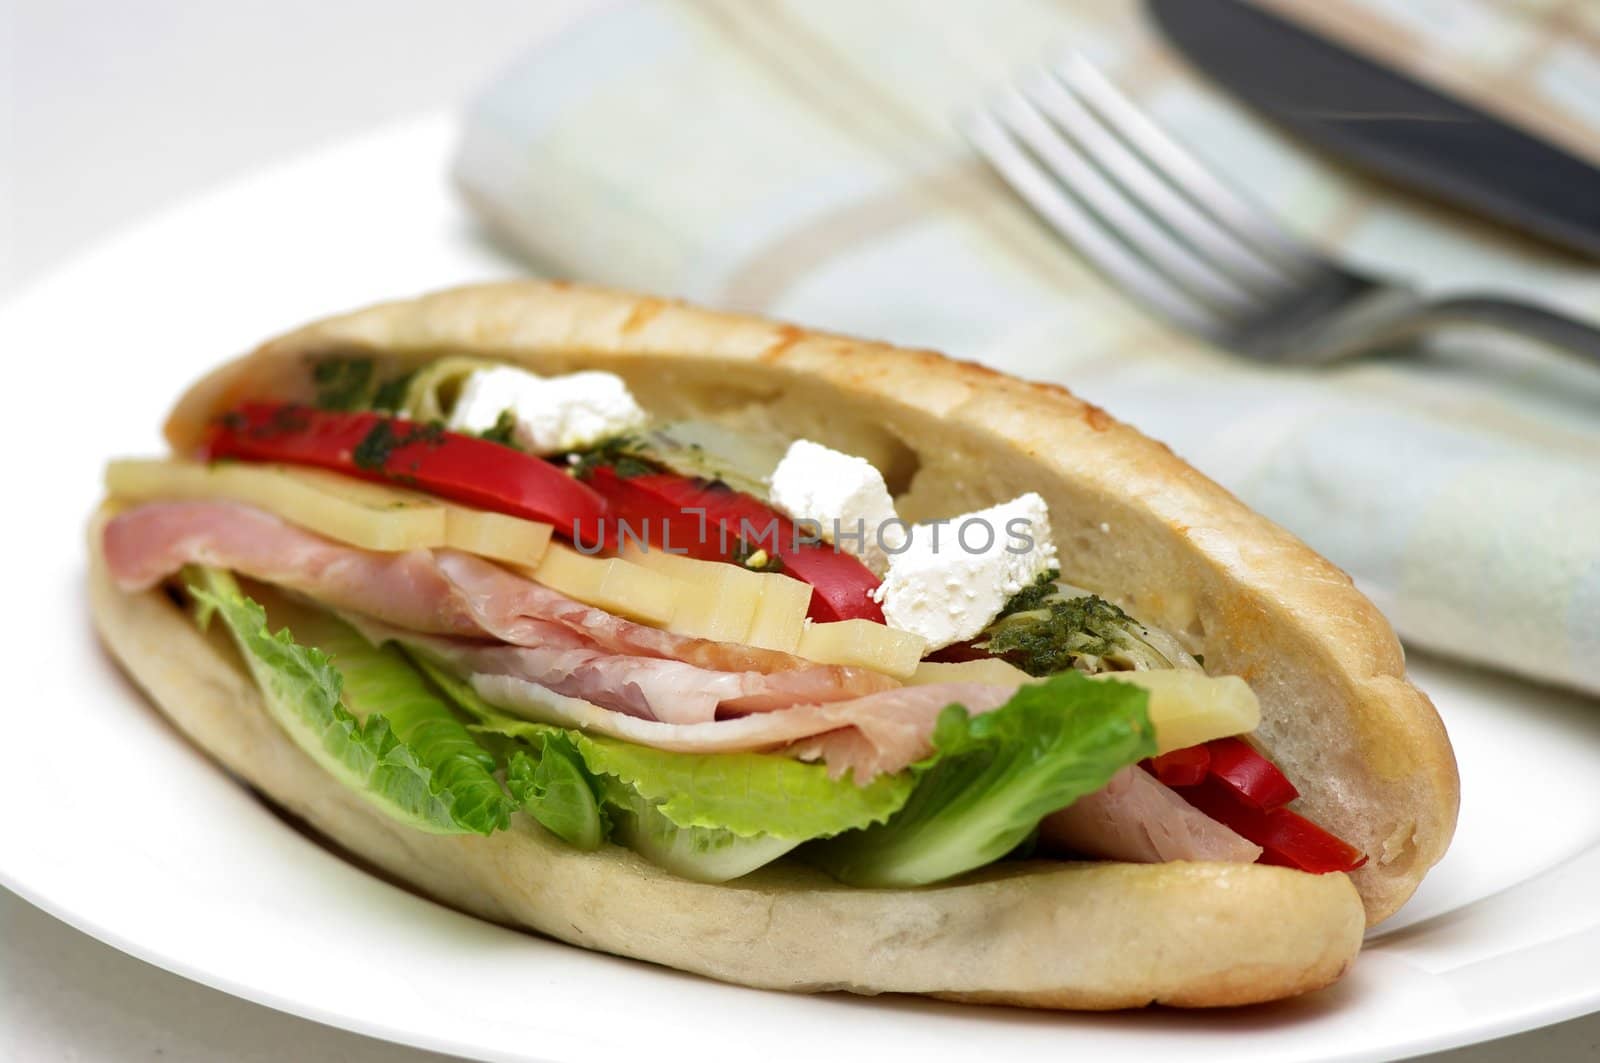 A delicious sandwich, bursting with fresh, healthy ingredients